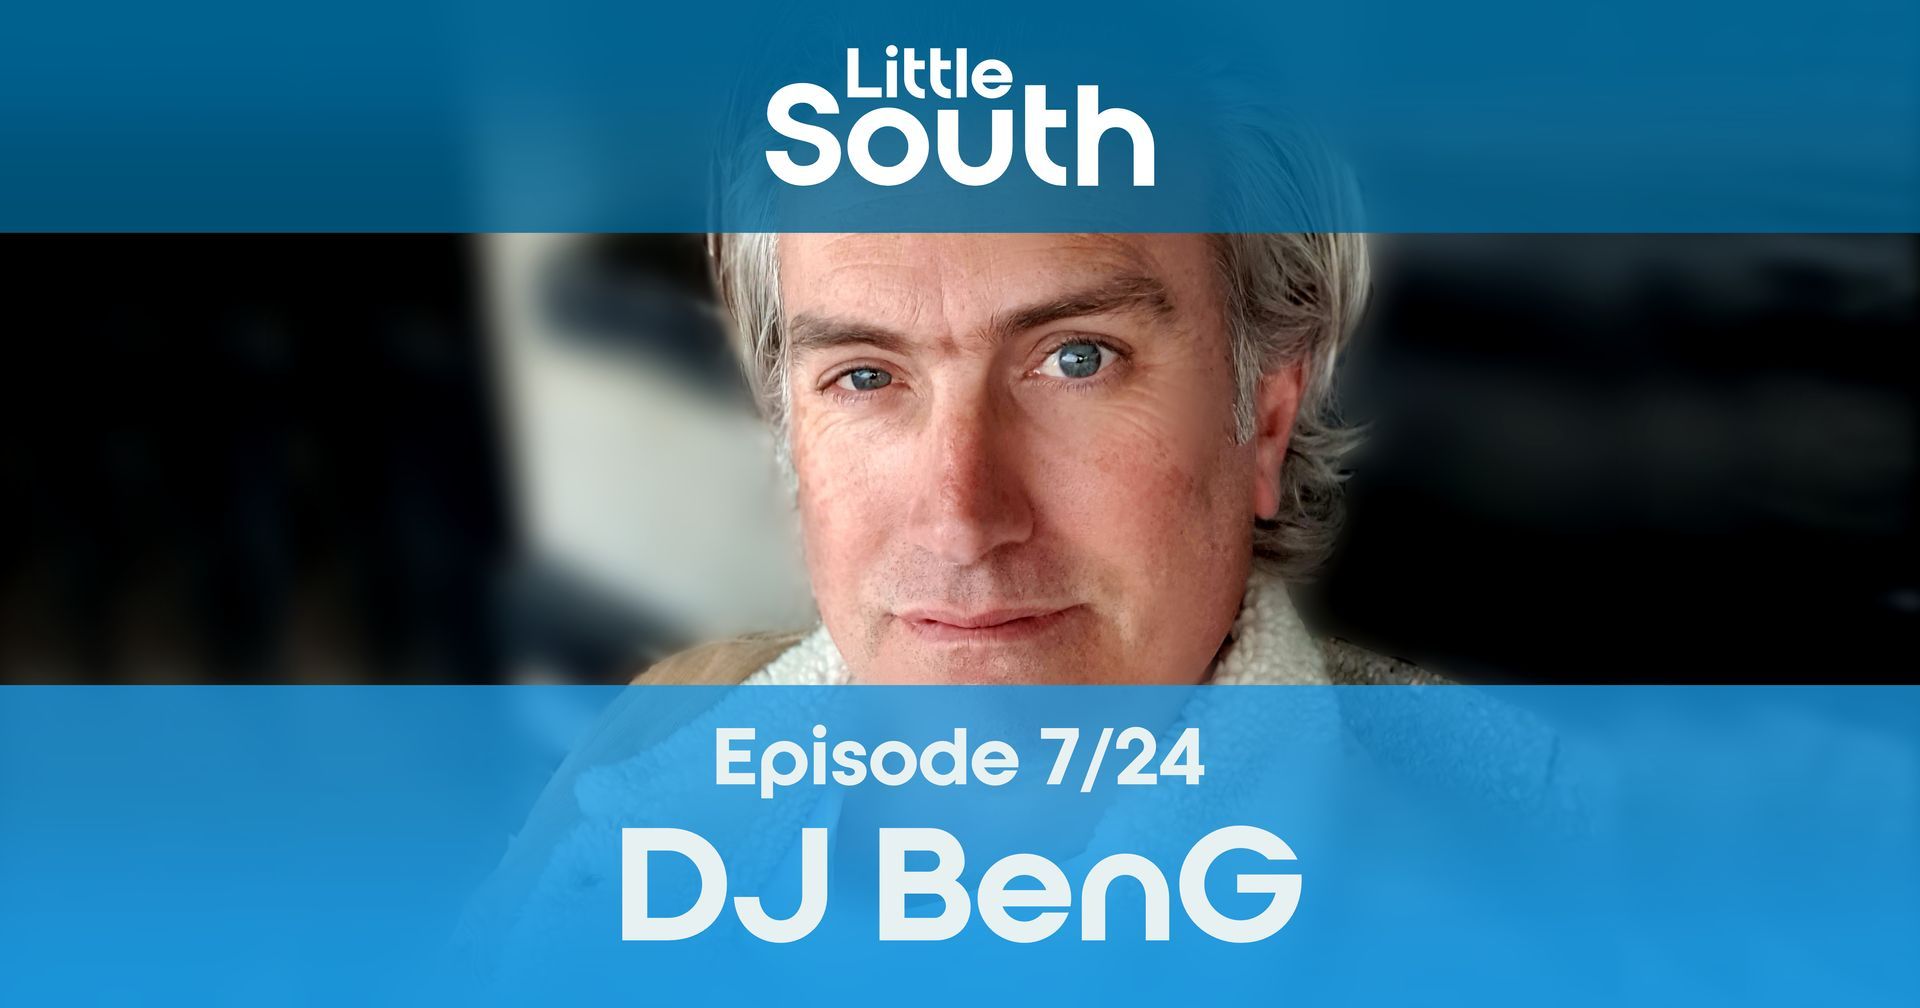 ste ellis is featured on episode 24/23 of little south